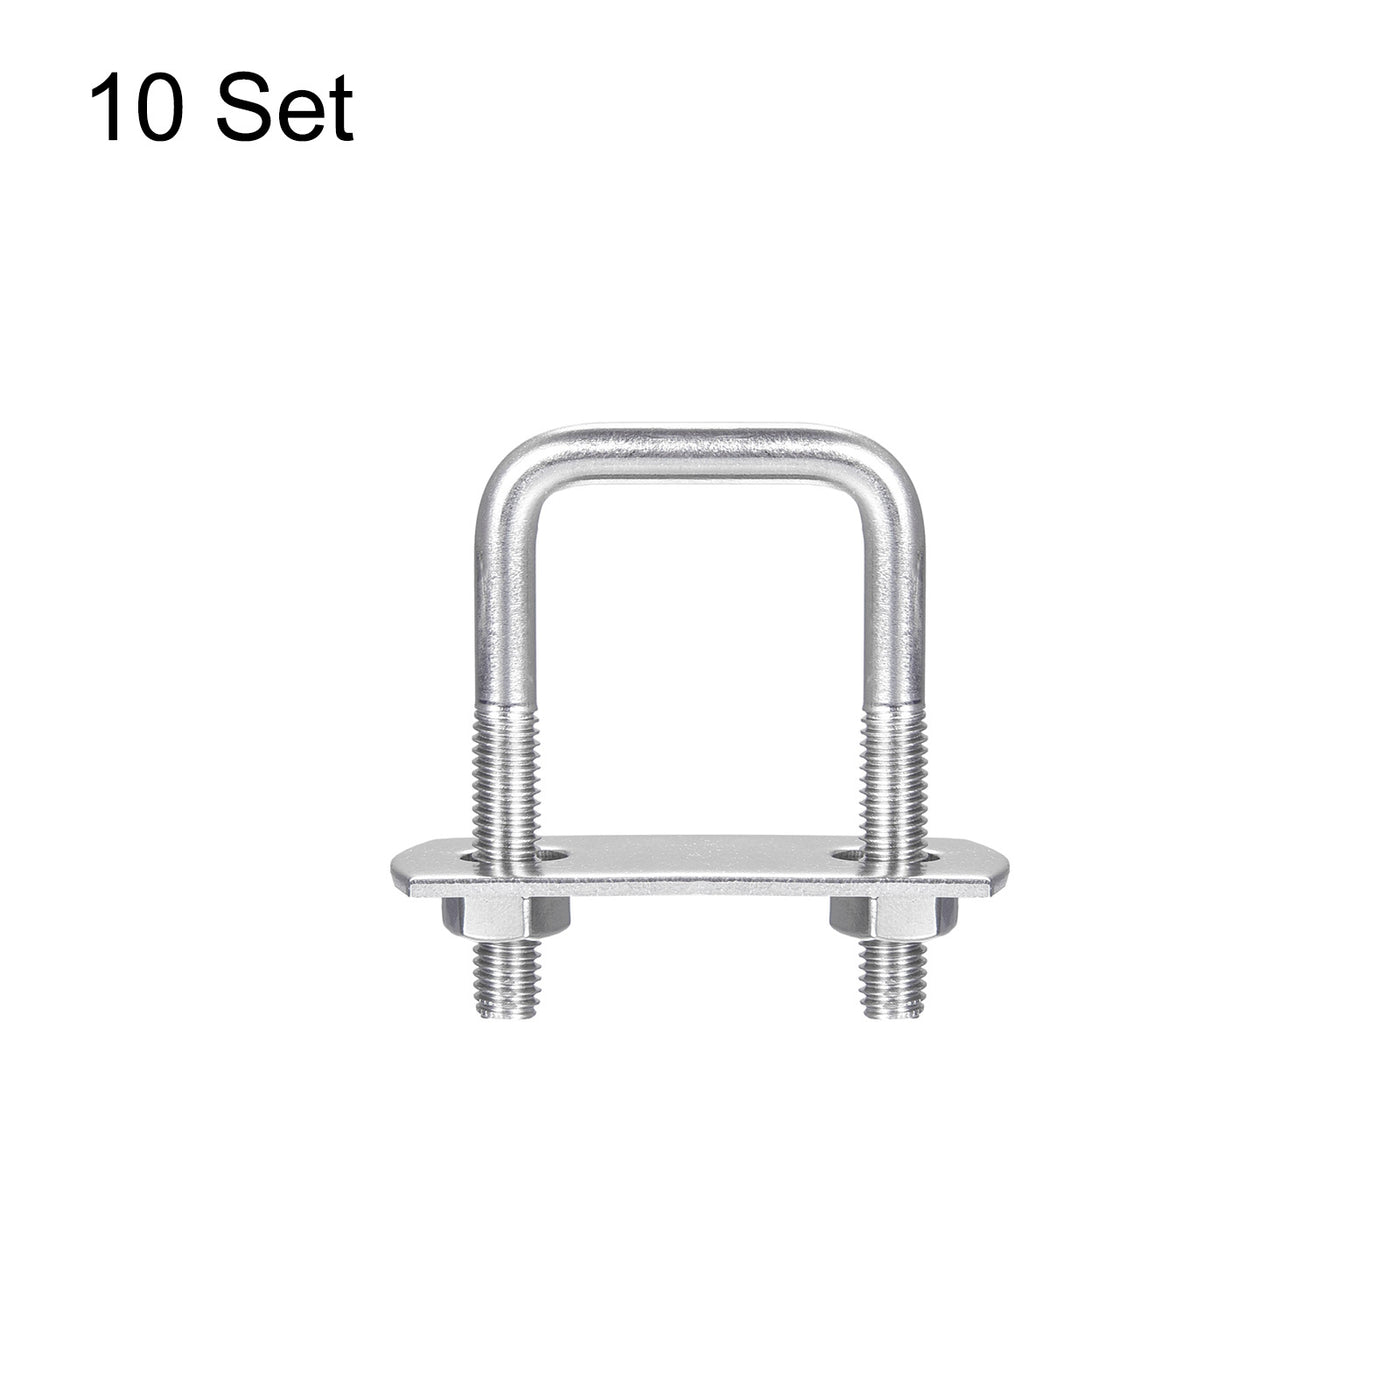 Uxcell Uxcell Square U-Bolts, 10 Sets 32mm Inner Width 46mm Length M6 with Nuts and Plates